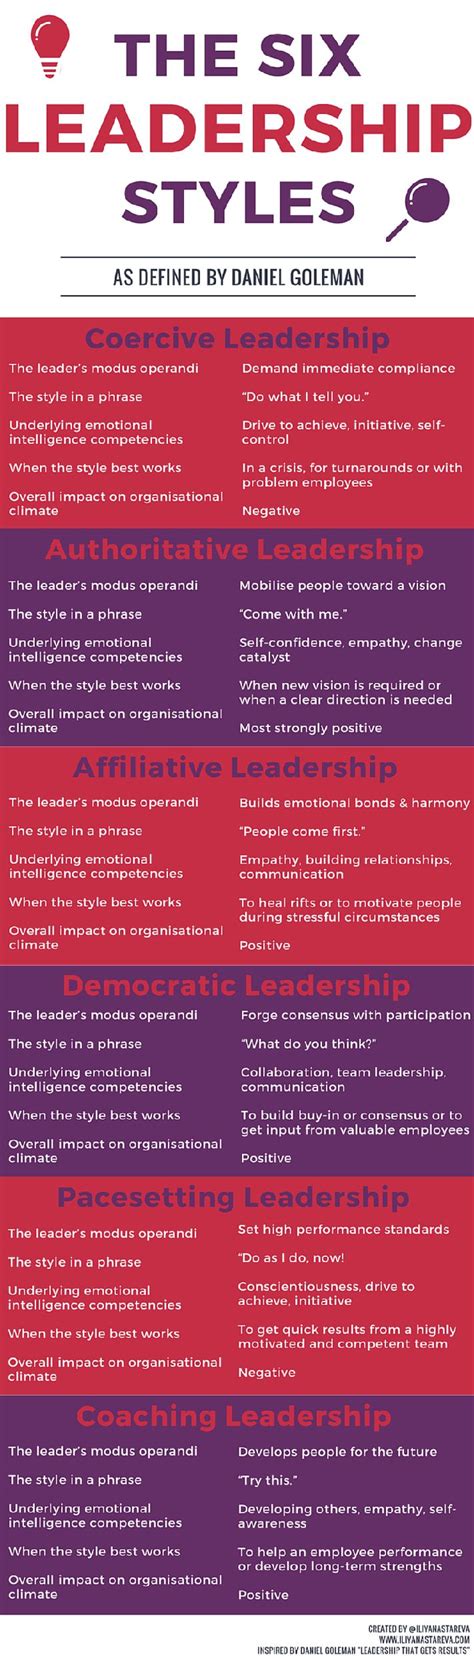 the six leadership styles and how to master them [infographic